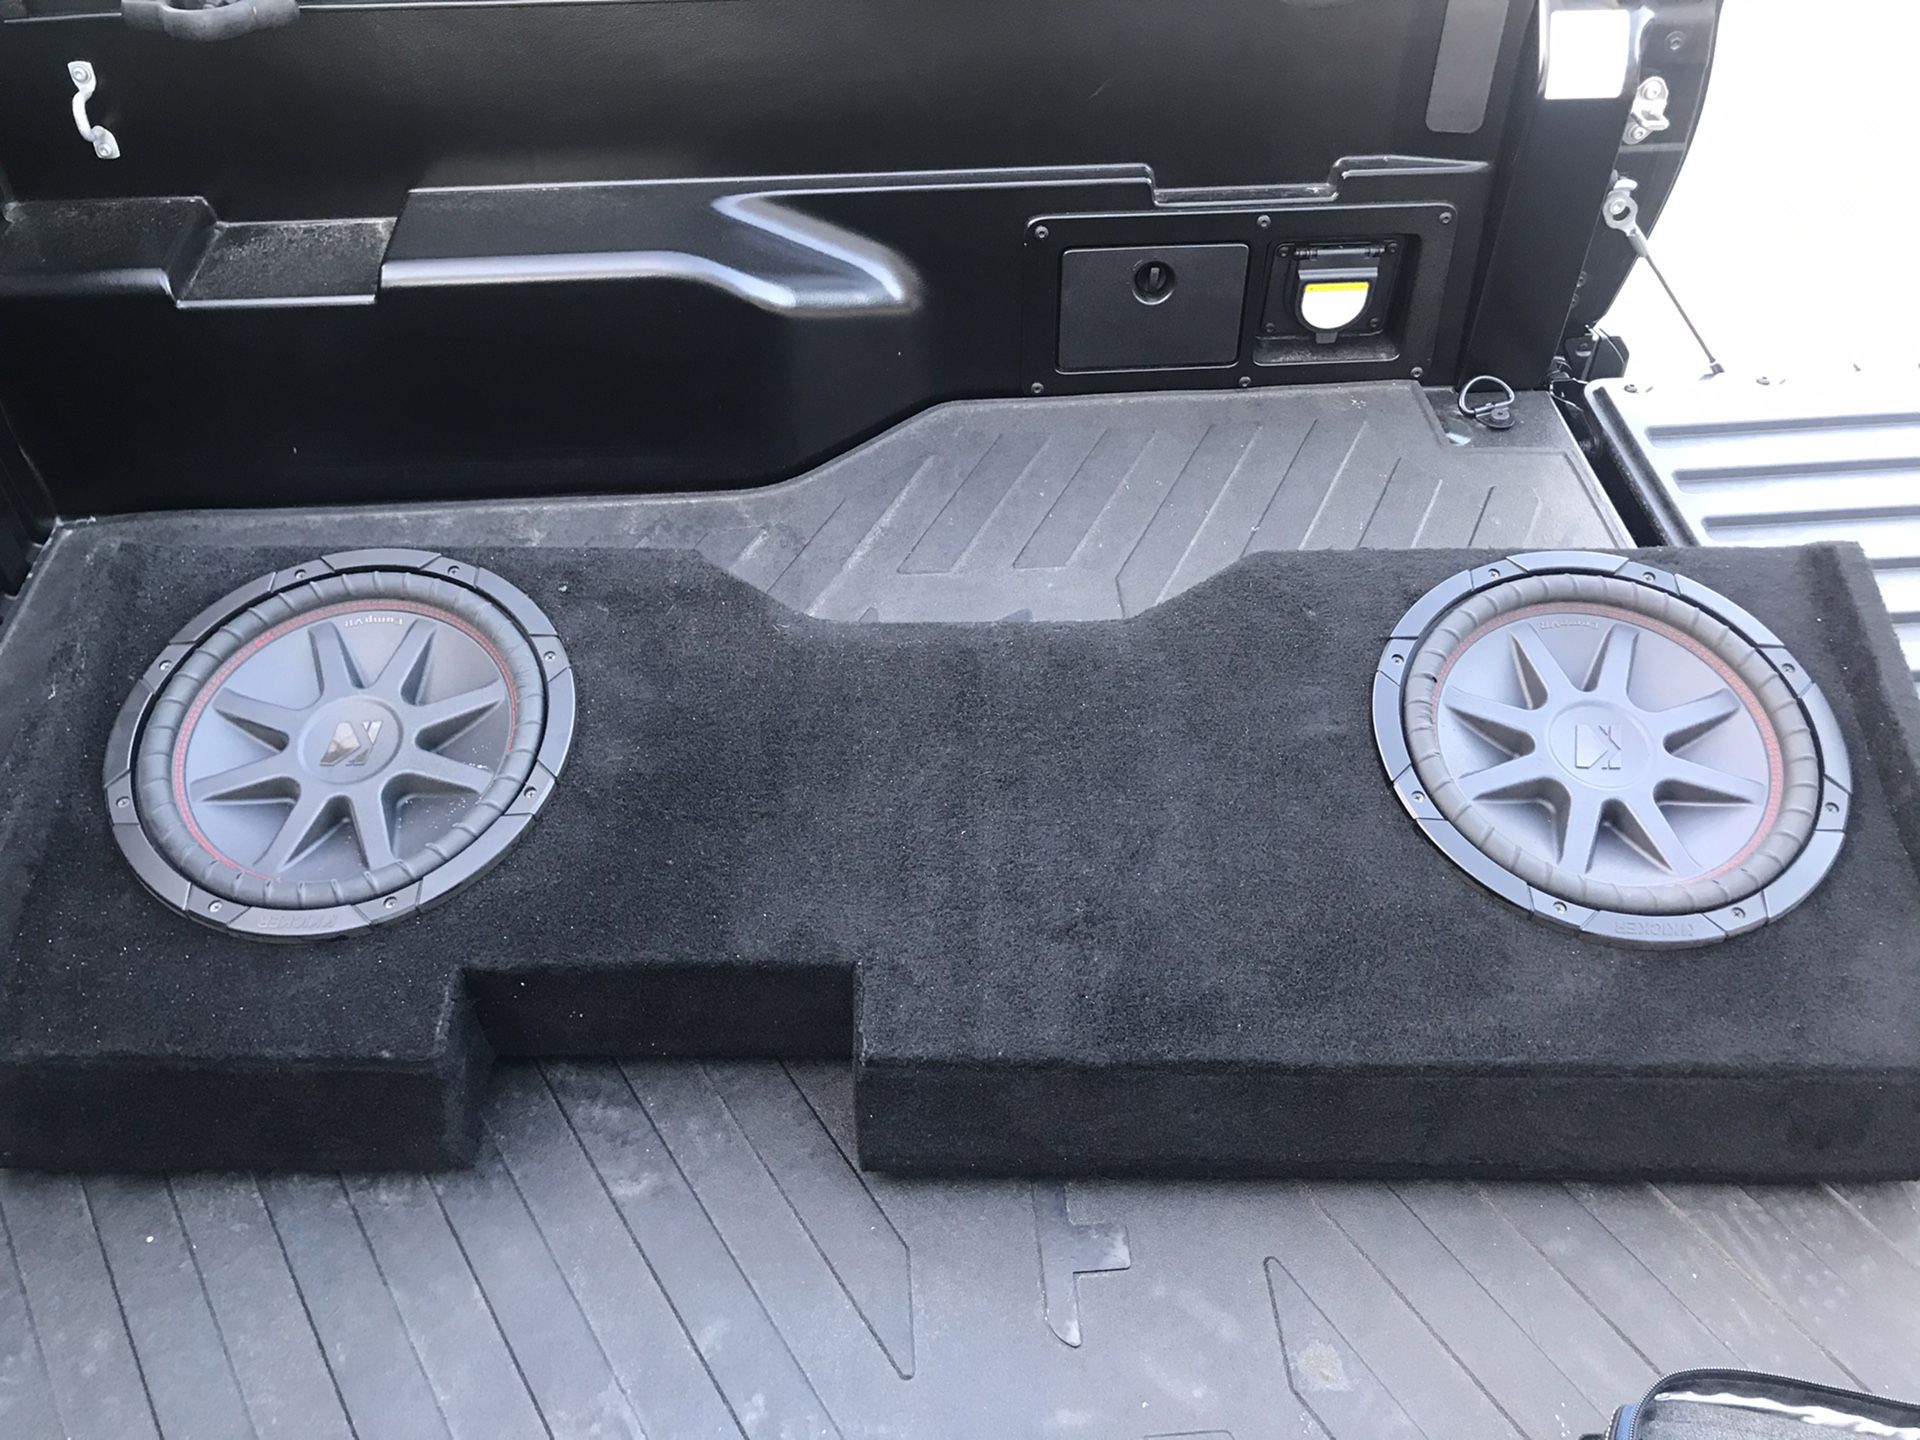 Two 10 inch Kicker CompVR subwoofers